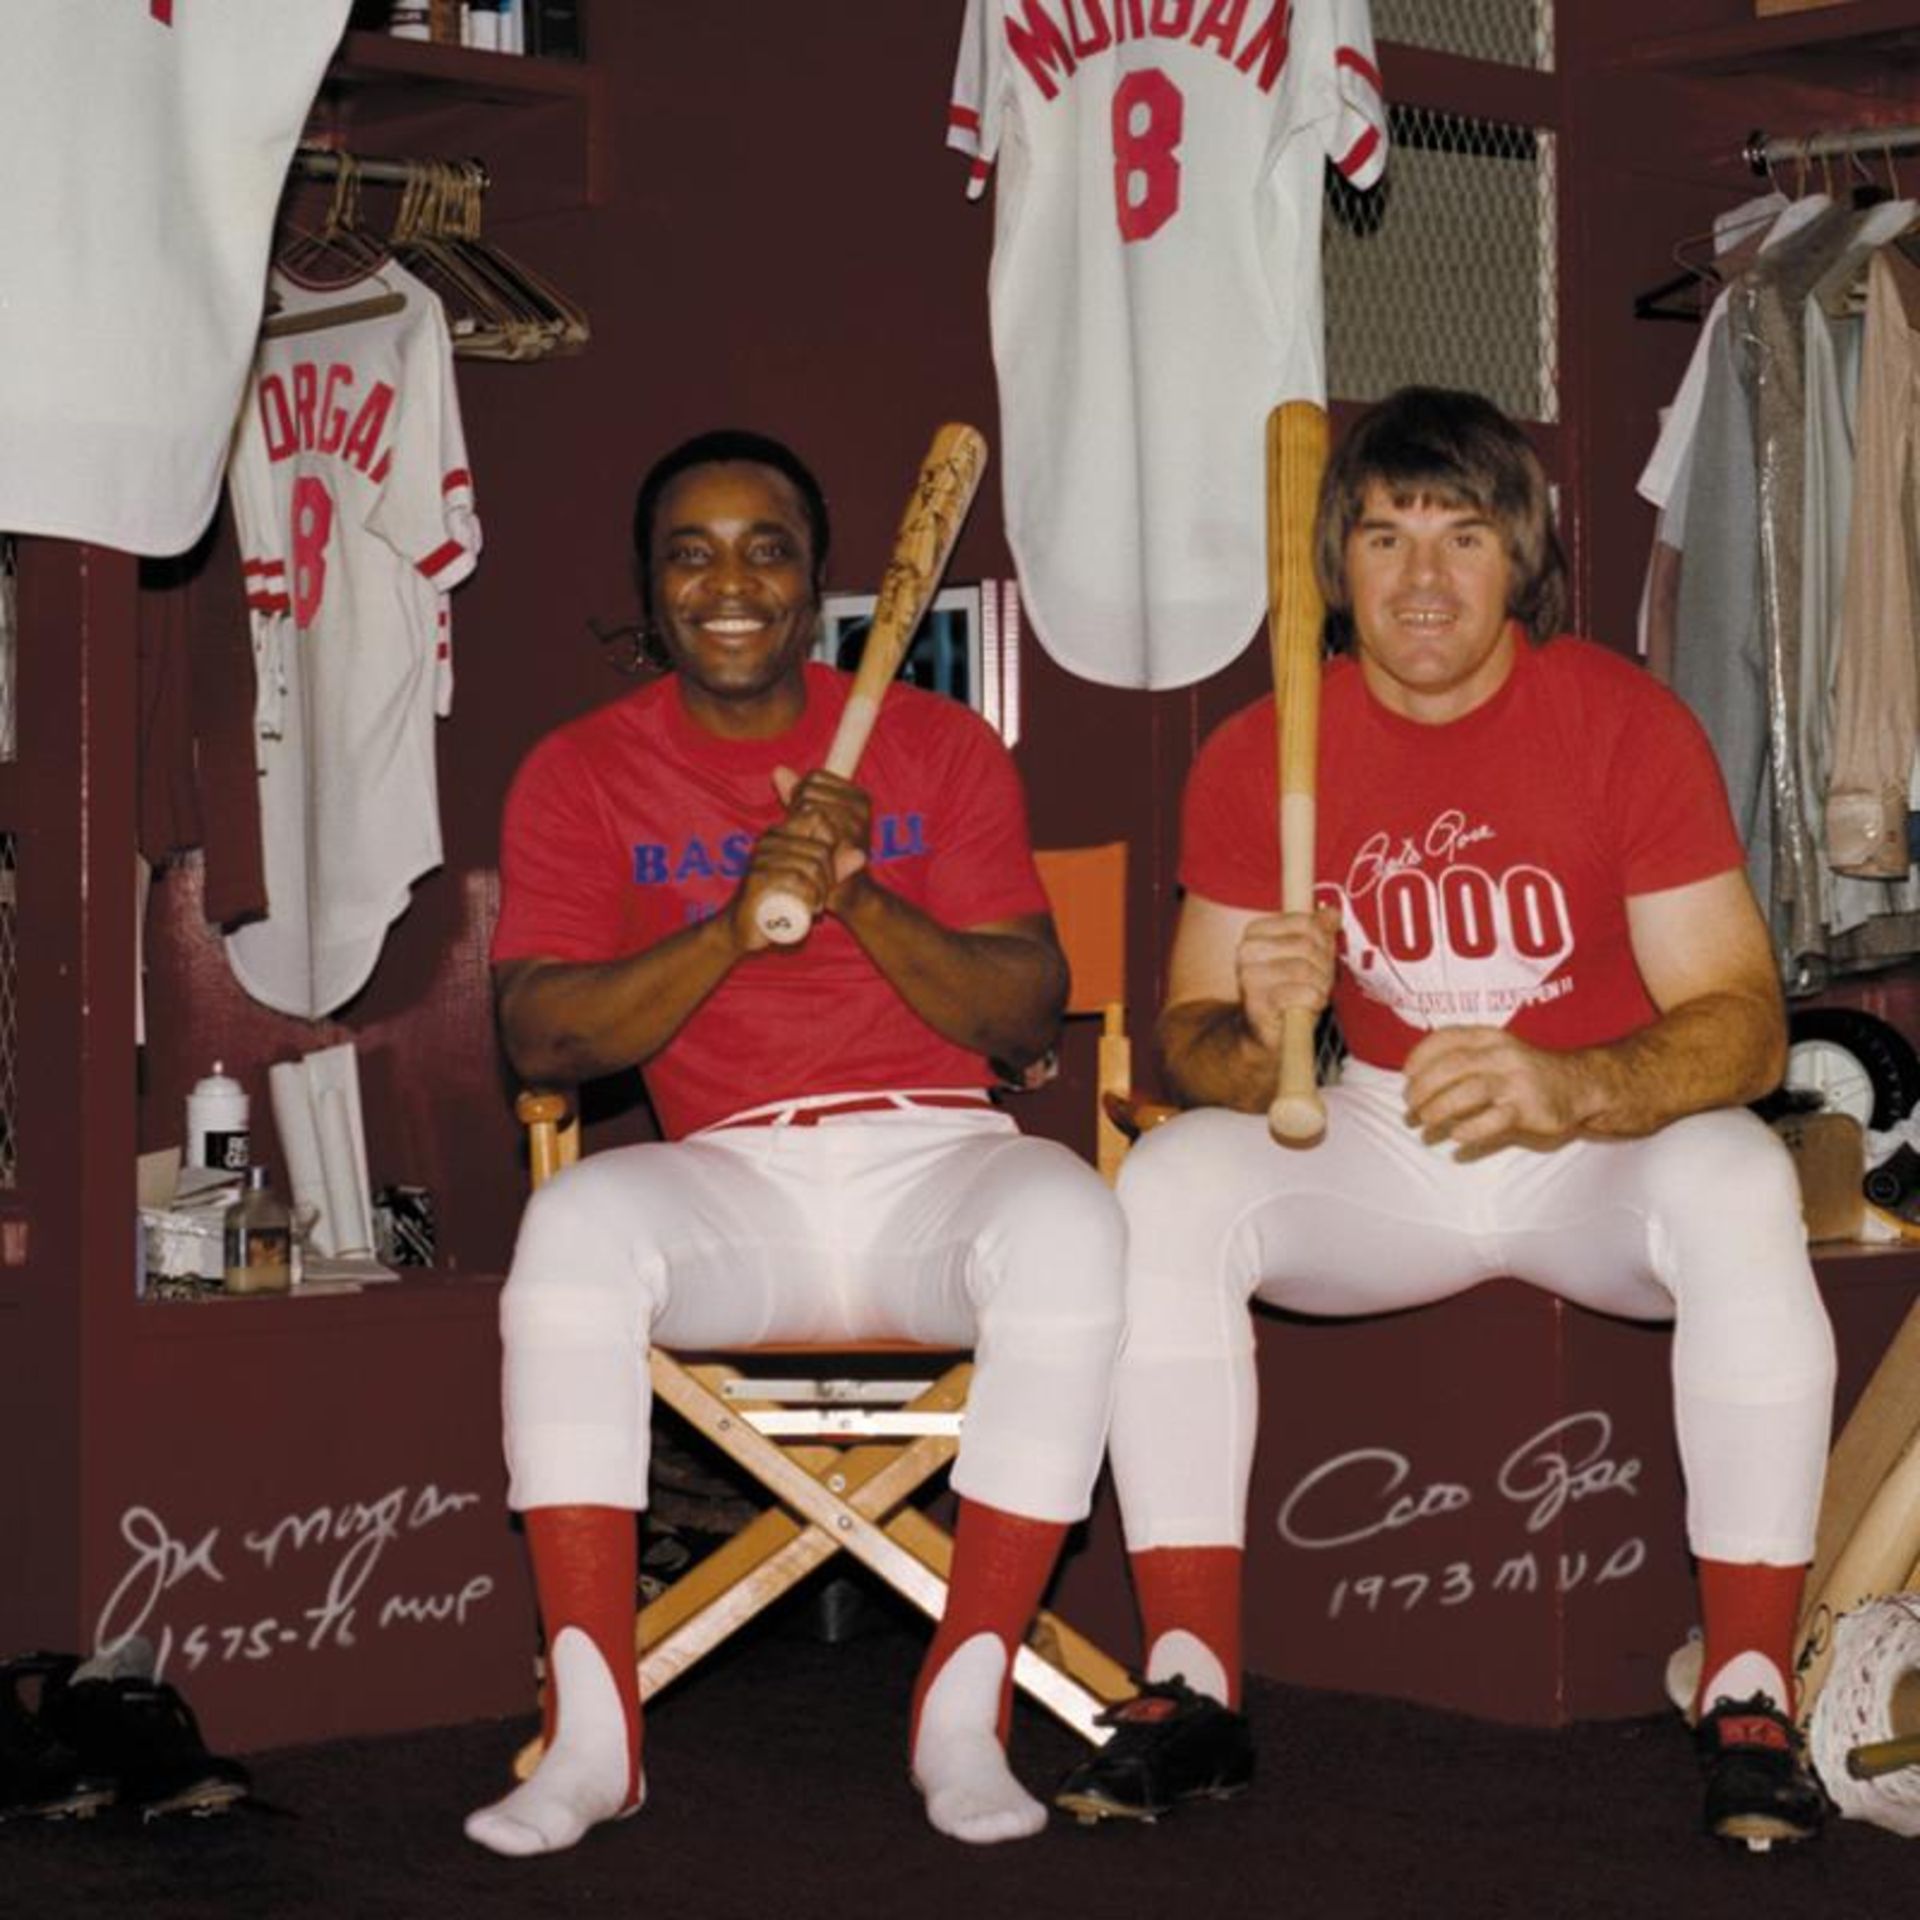 Pete Rose & Morgan in Clubhouse by Rose, Pete - Image 2 of 2